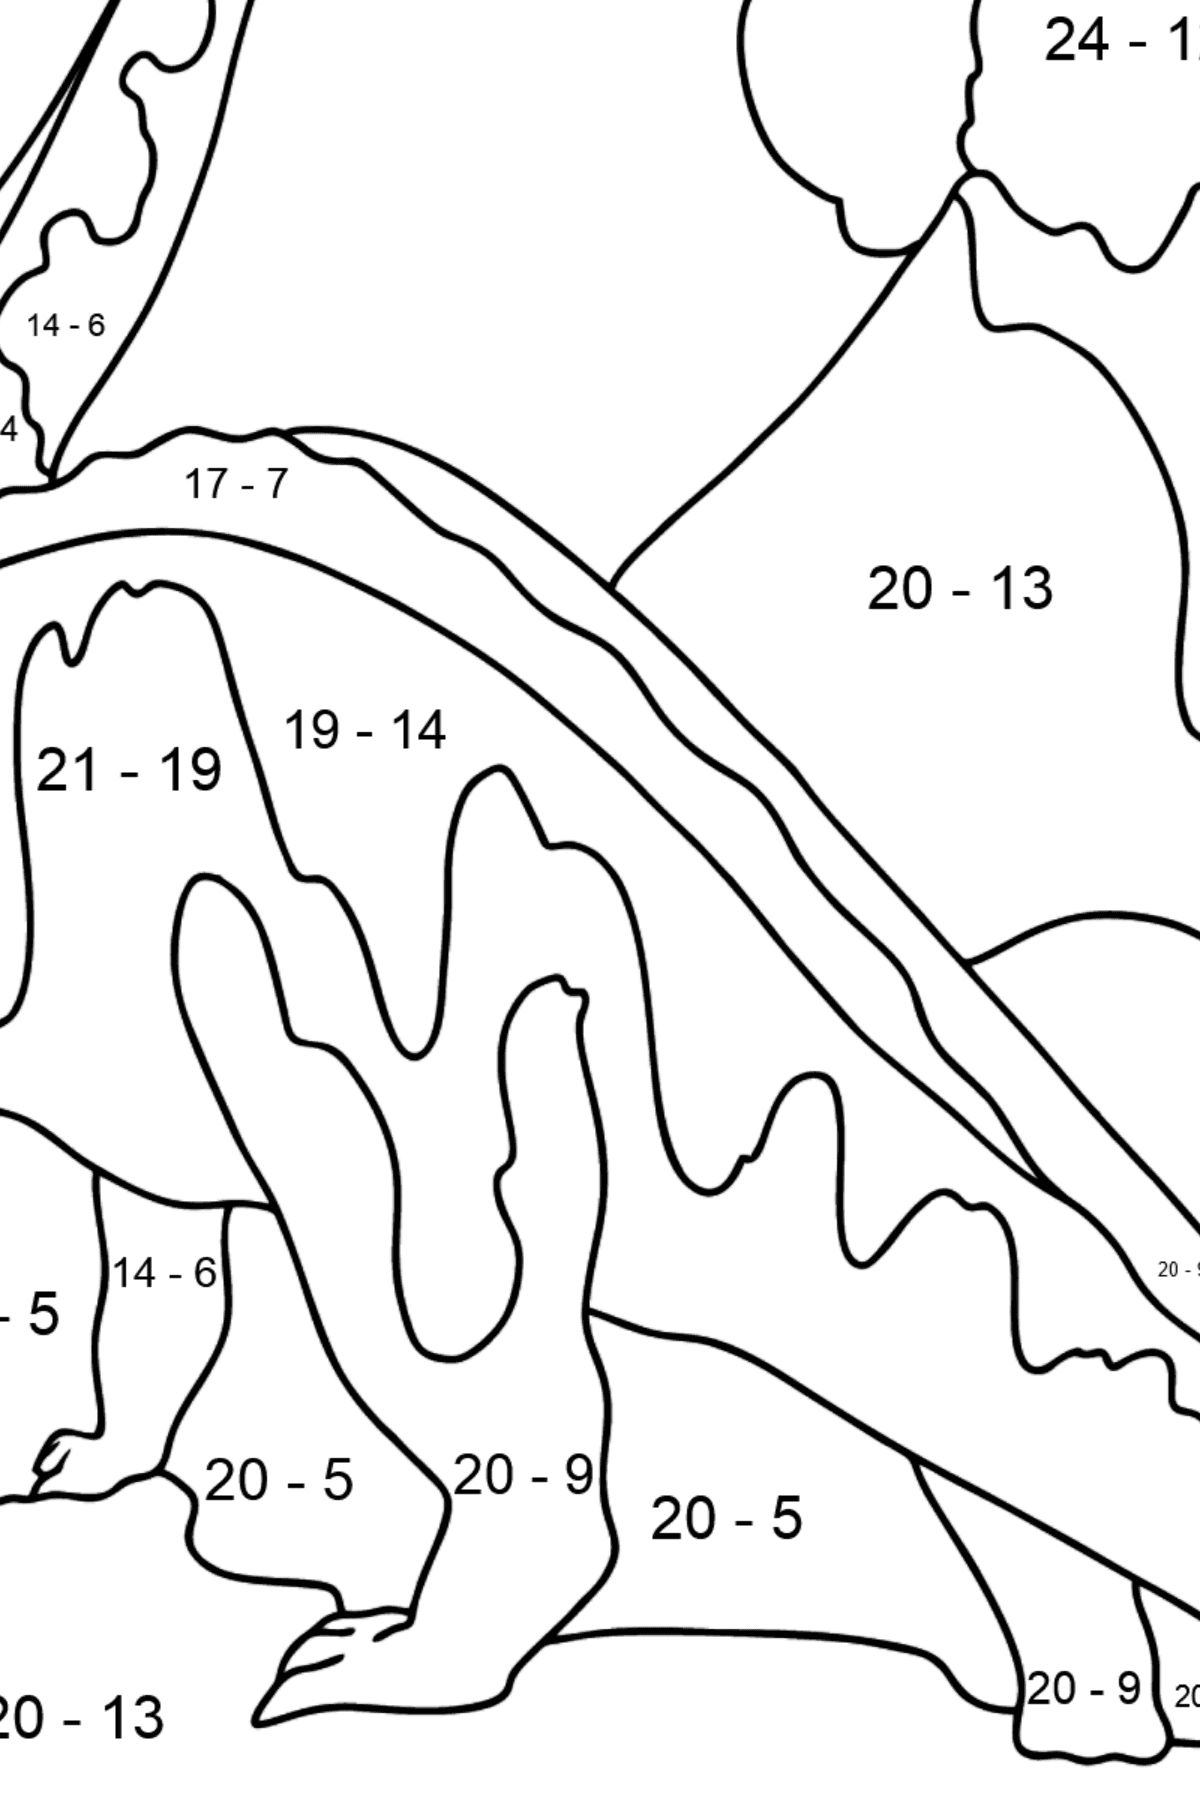 Coloring Page - Brontosaurus or an Elephant-like Dinosaur - Math Coloring - Subtraction for Kids